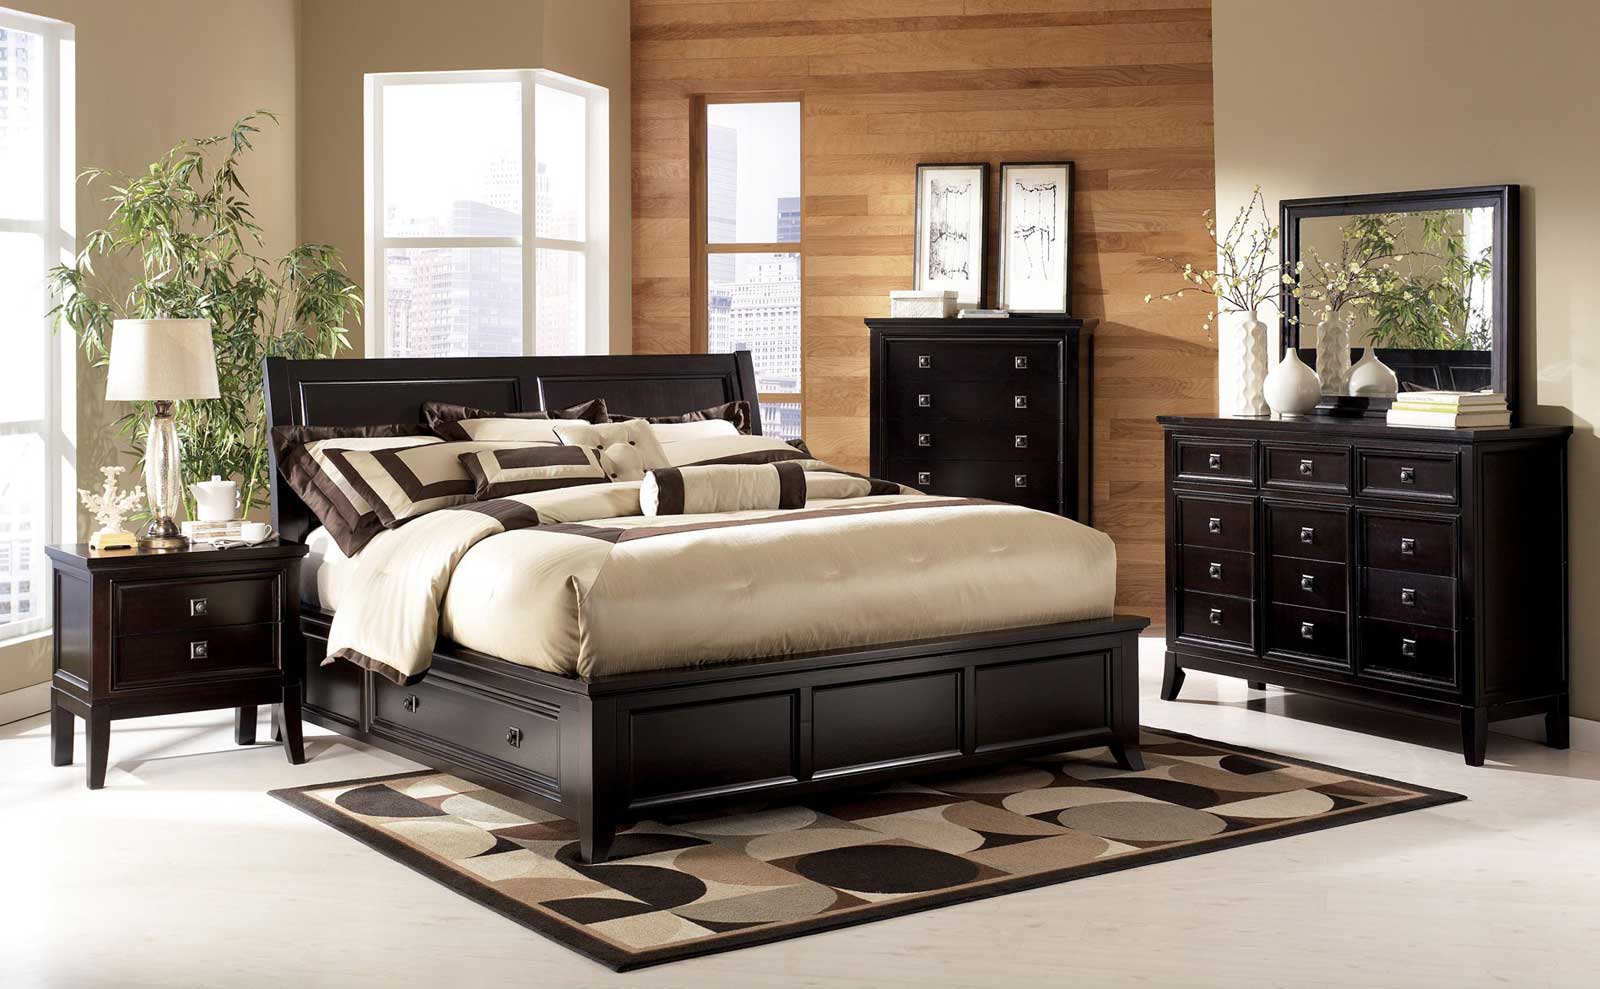 King Bedroom Aparments Trendy King Bedroom Sets For Apartment Design Ideas With Modern Black Armoire Design And Interesting Black Storage Idea Also Alluring Rectangle Mirror Design Bedroom Enhance The King Bedroom Sets: The Soft Vineyard-6